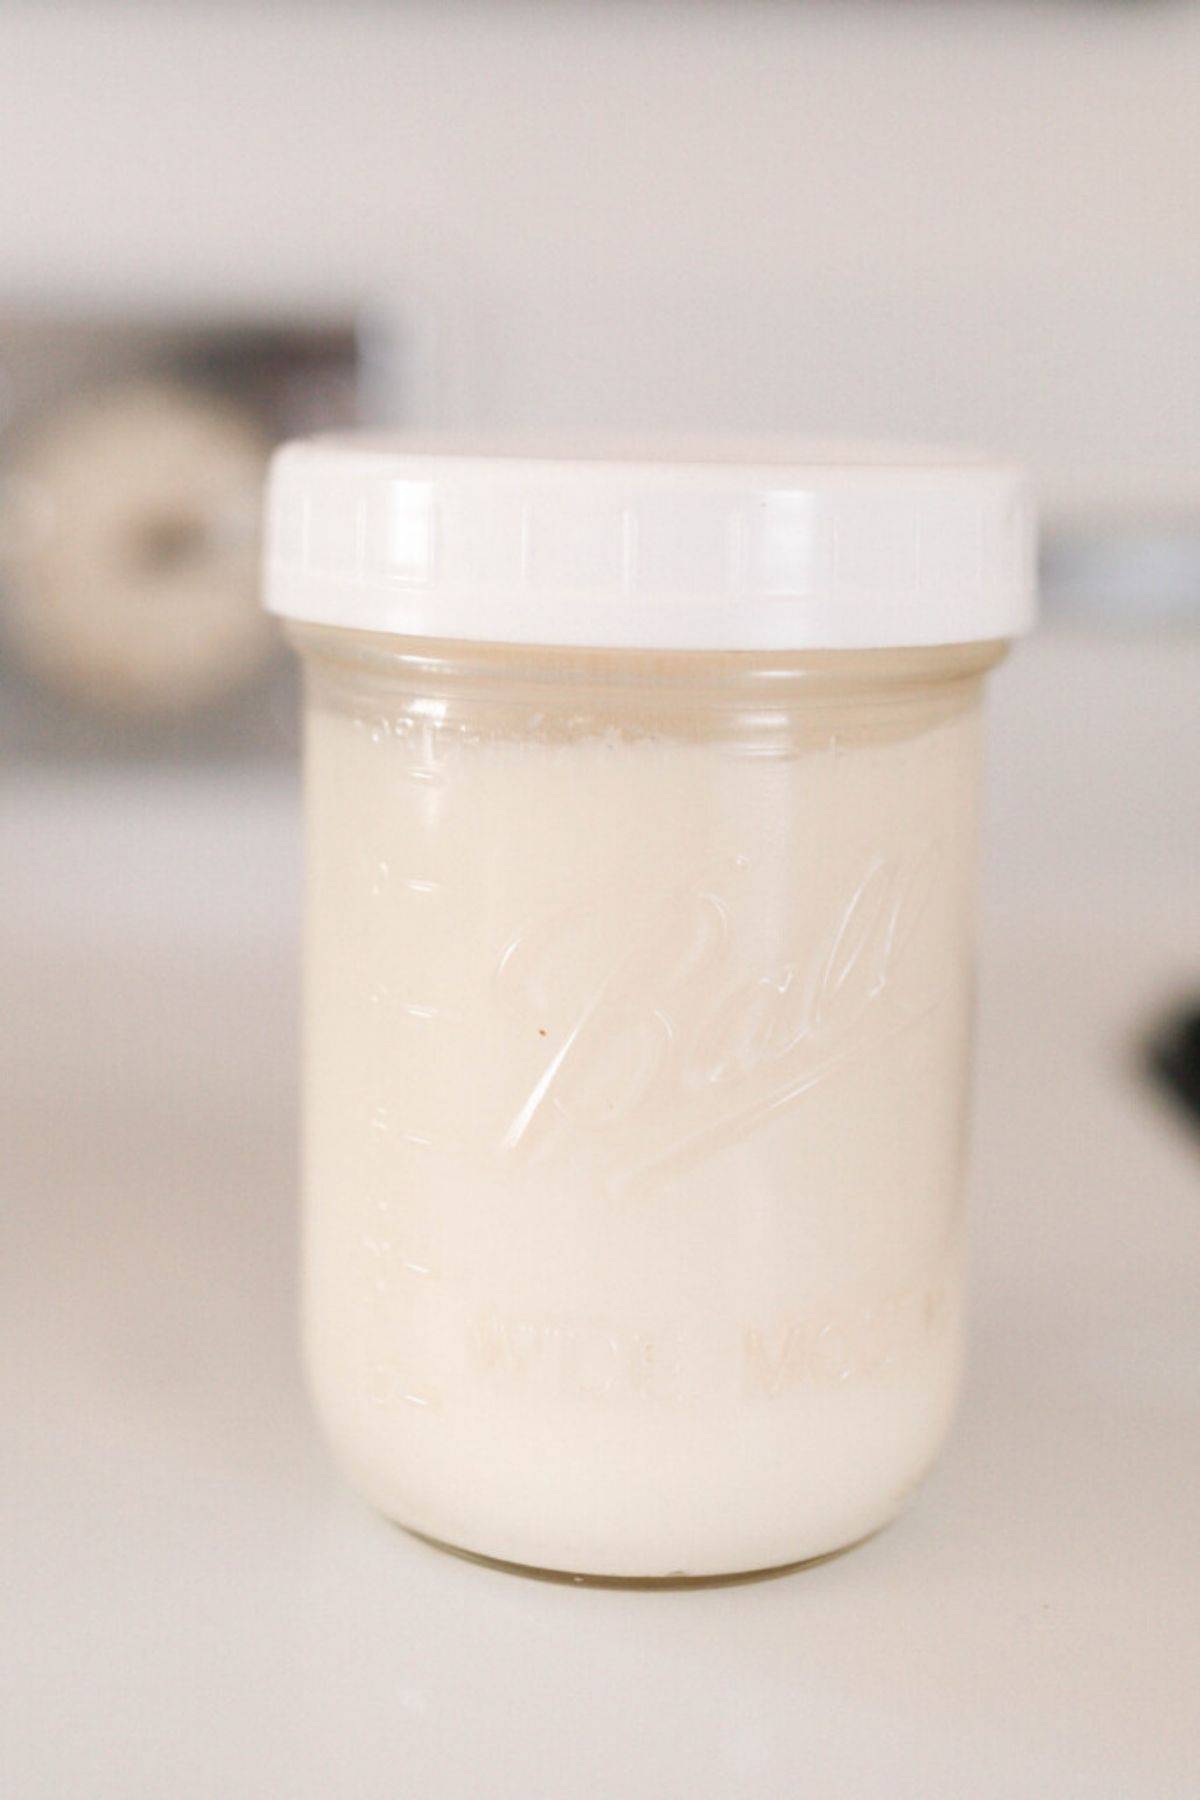 rendered beef fat in a mason jar with a white plastic lid on a white antique stove